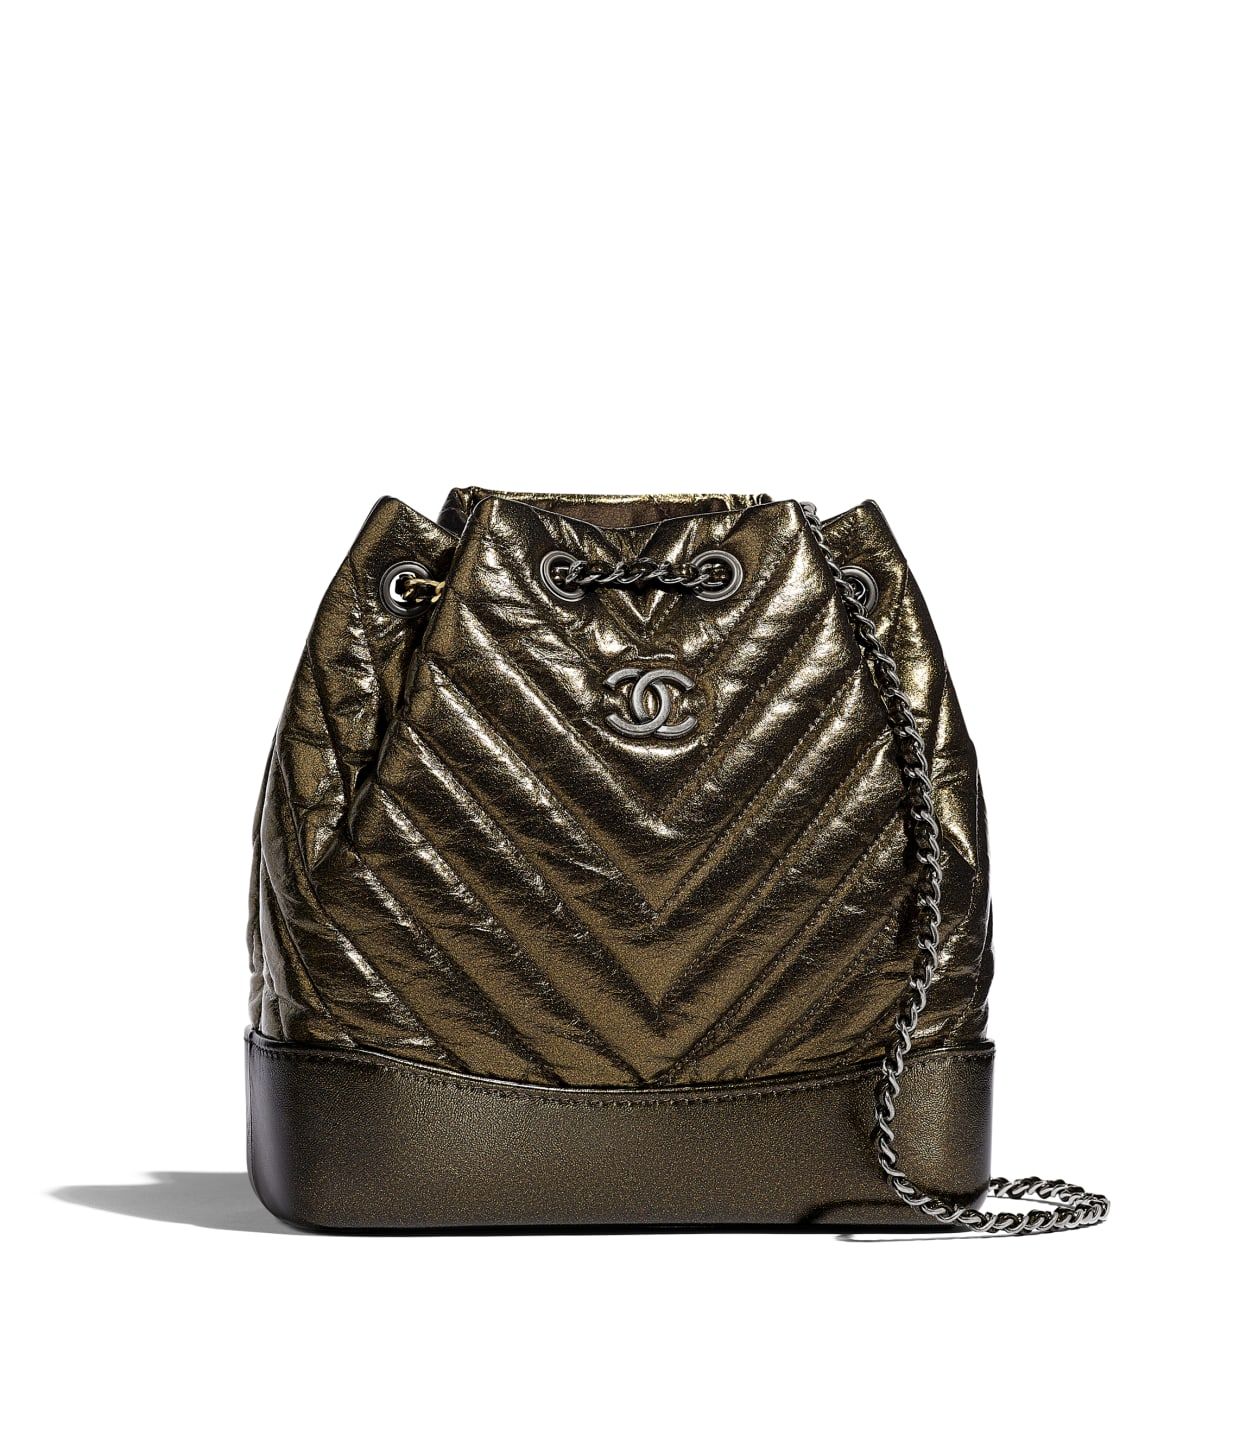 Aged Calfskin, Silver-Tone & Gold-Tone Metal Gold CHANEL'S GABRIELLE Small Backpack | CHANEL | Chanel, Inc. (US)